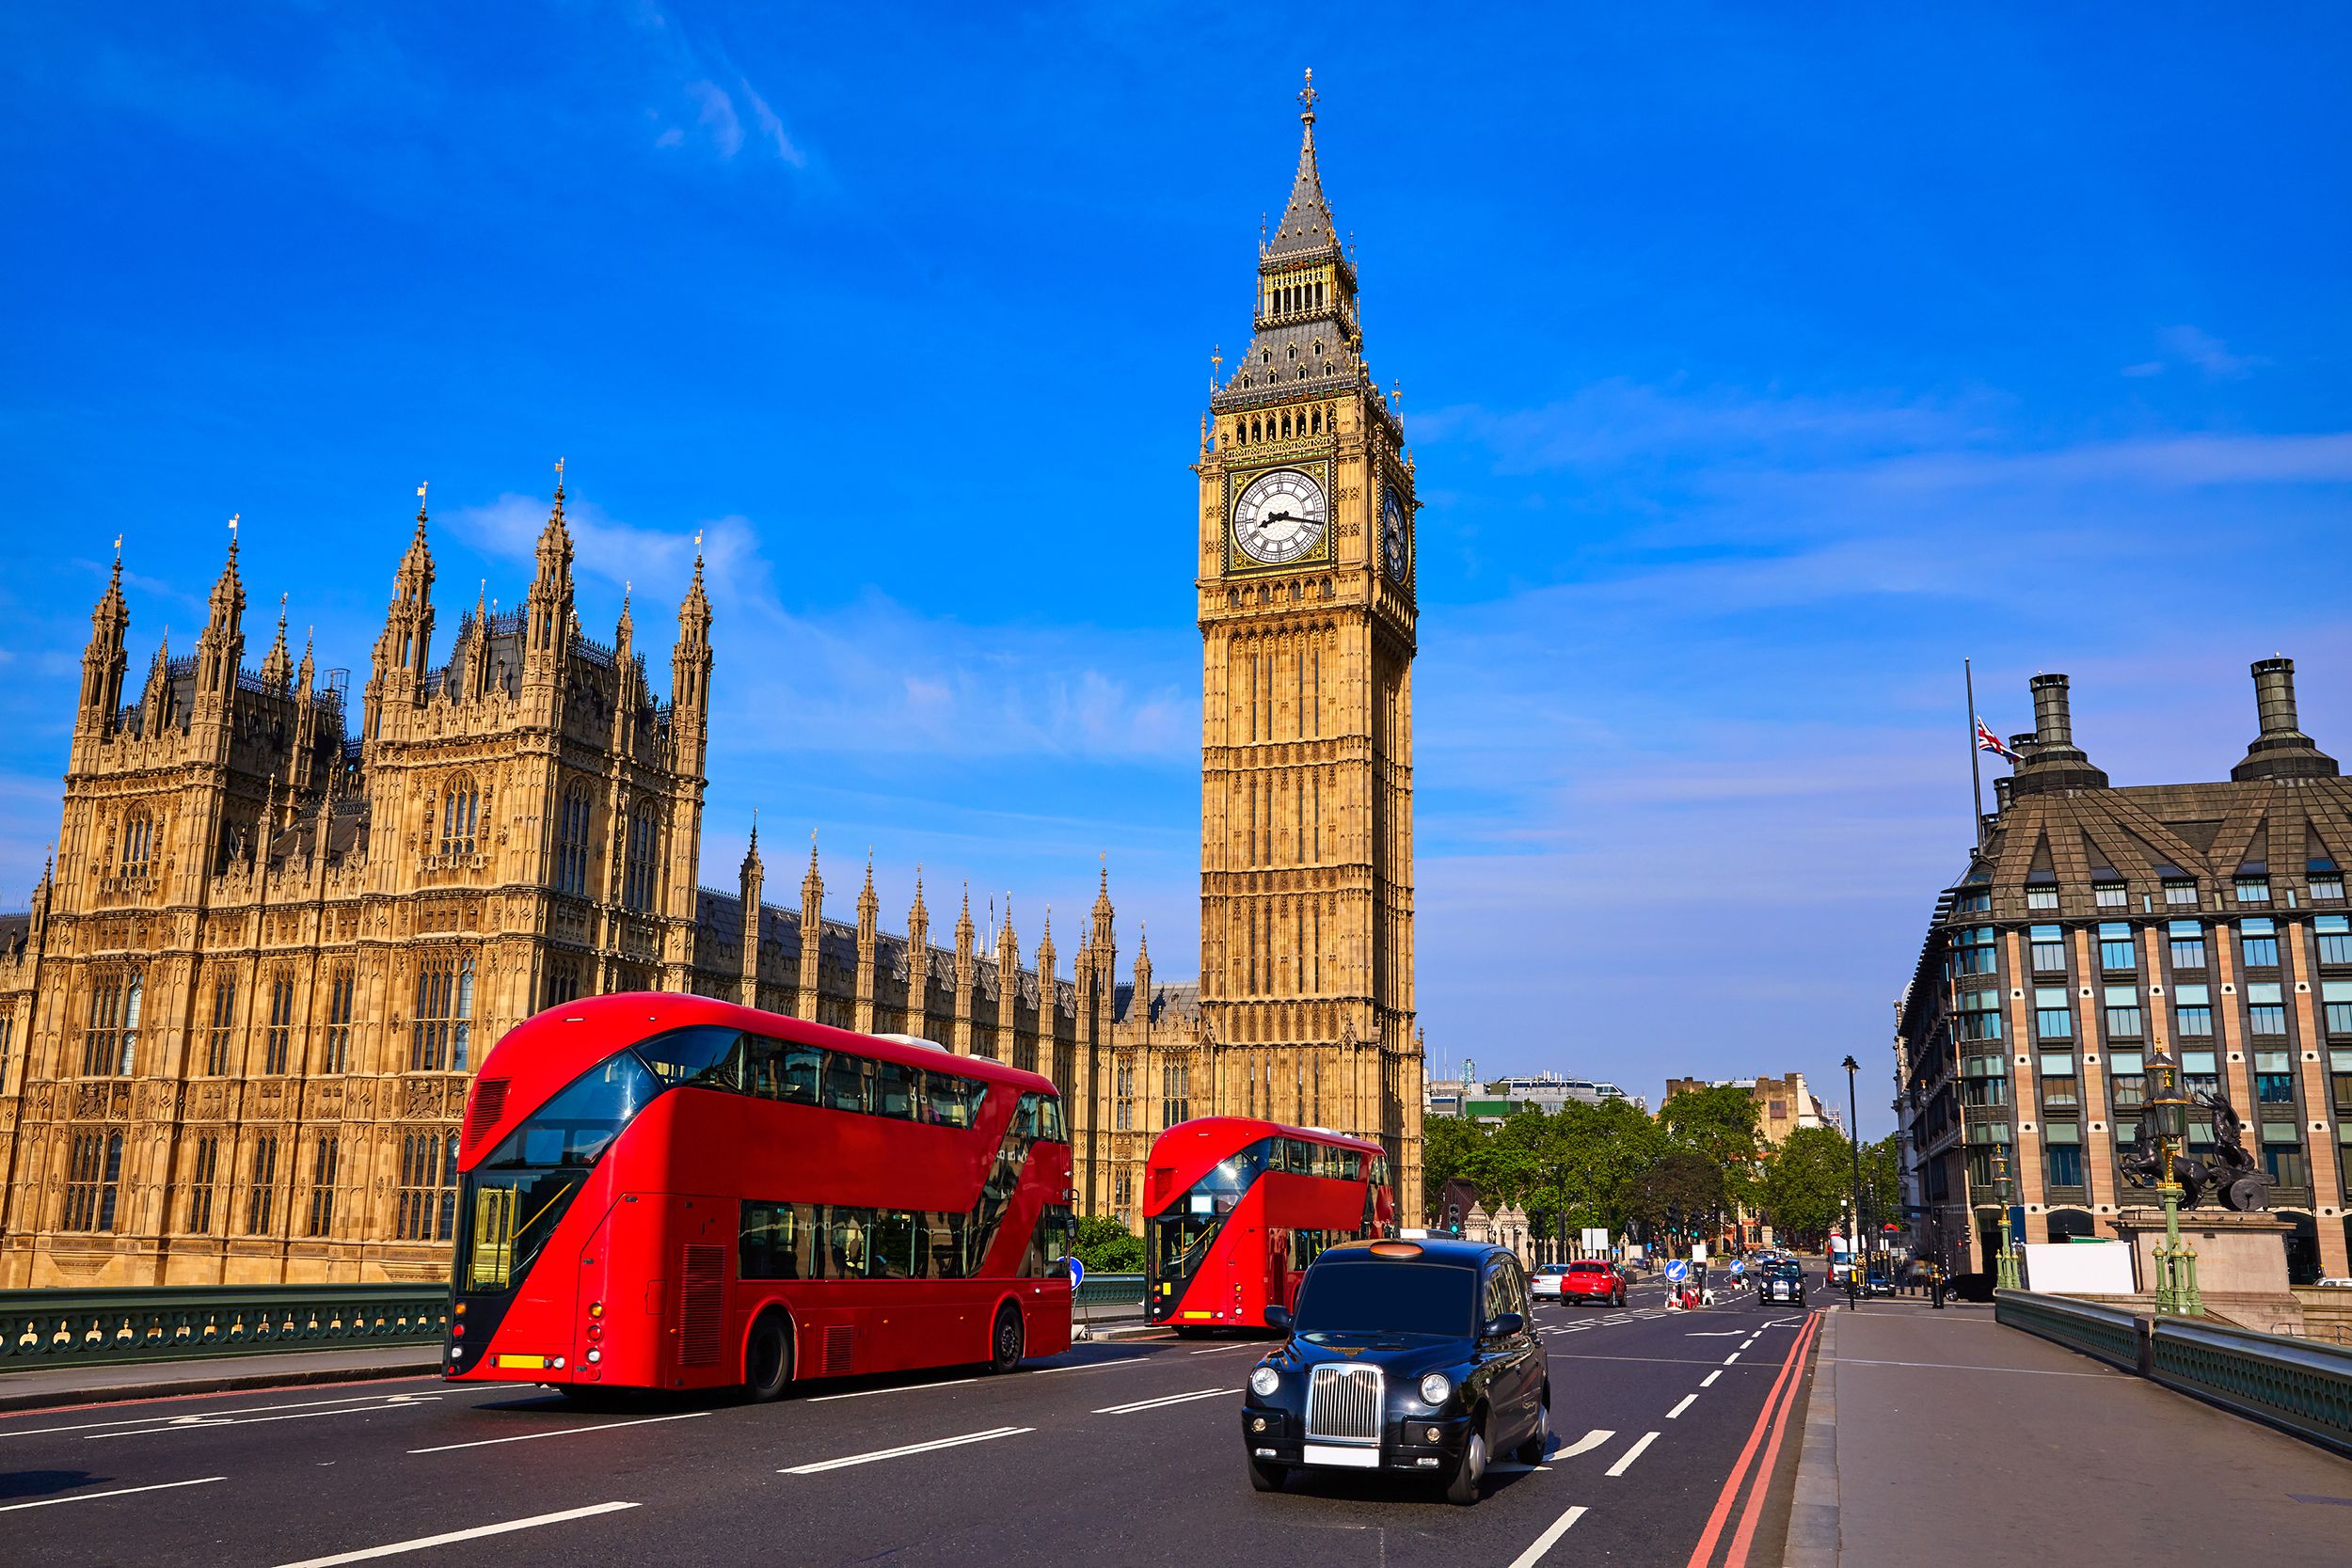 <p>Home of Big Ben, the Tower Bridge, Buckingham Palace, there is plenty for children to explore in London, a city steeped in history and culture. And while there, don't miss getting outside the city to explore <a href="https://www.english-heritage.org.uk/visit/places/stonehenge/">Stonehenge</a> with children, allowing them to walk in the footsteps of our Neolithic ancestors at one of the best-known prehistoric monuments in Europe.</p>